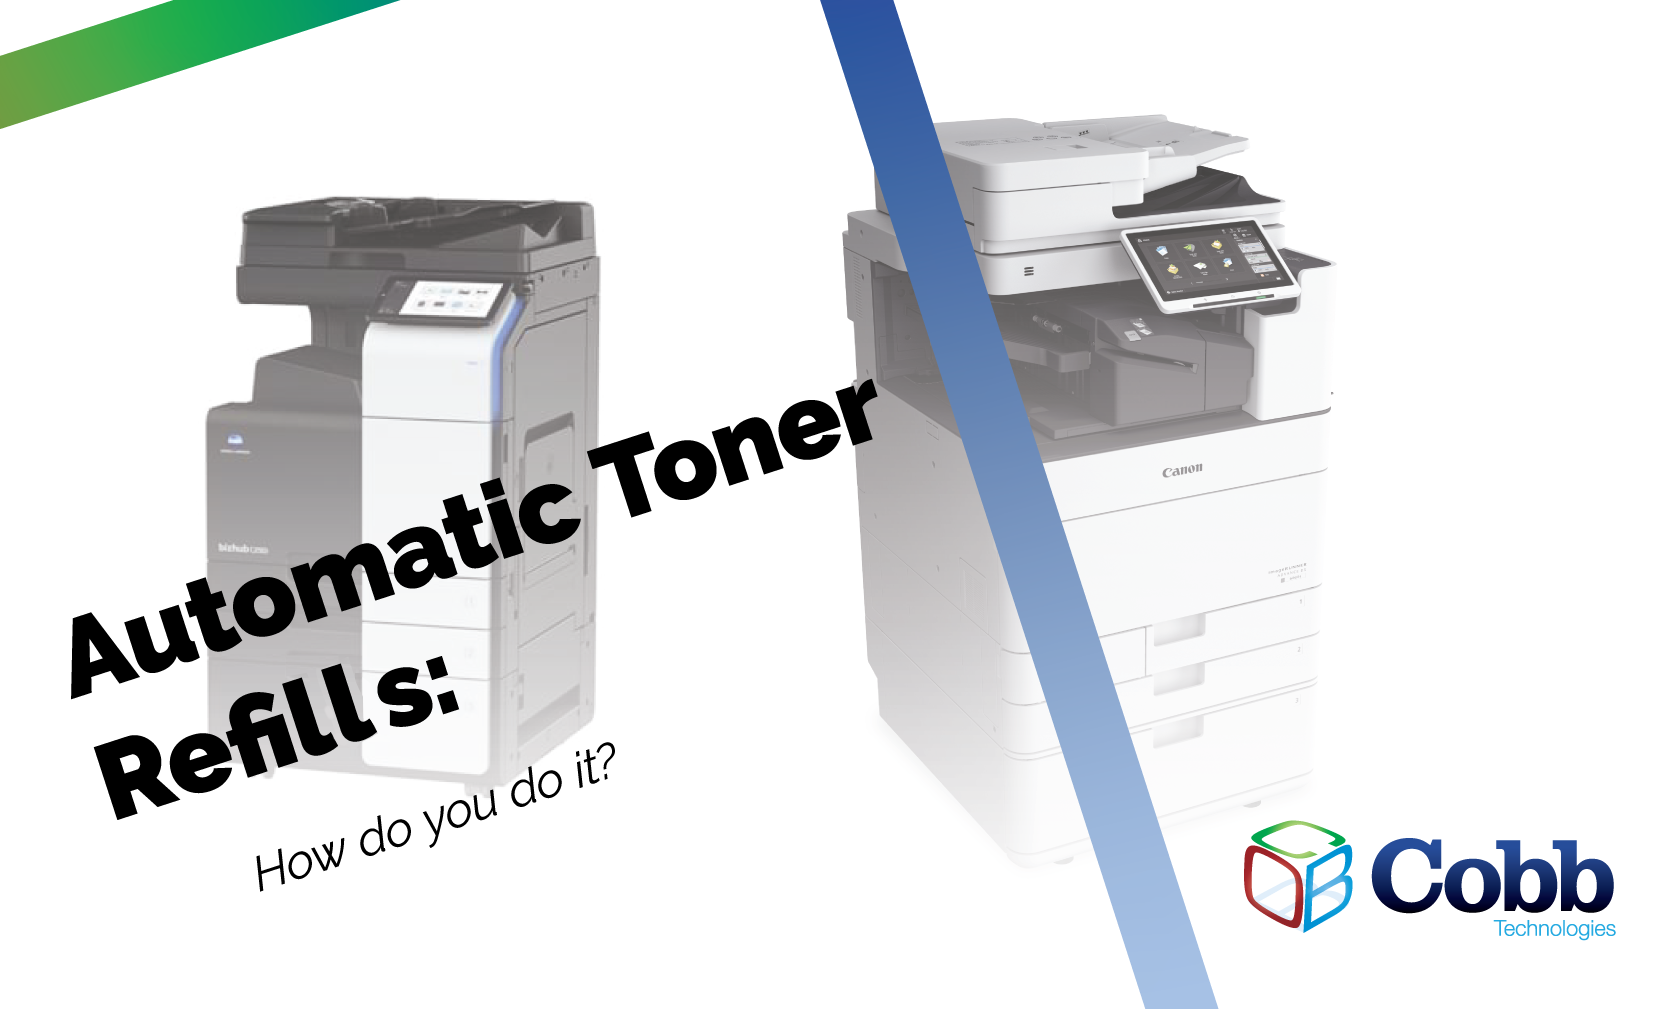 Automatic Toner Refills: How do you do it?